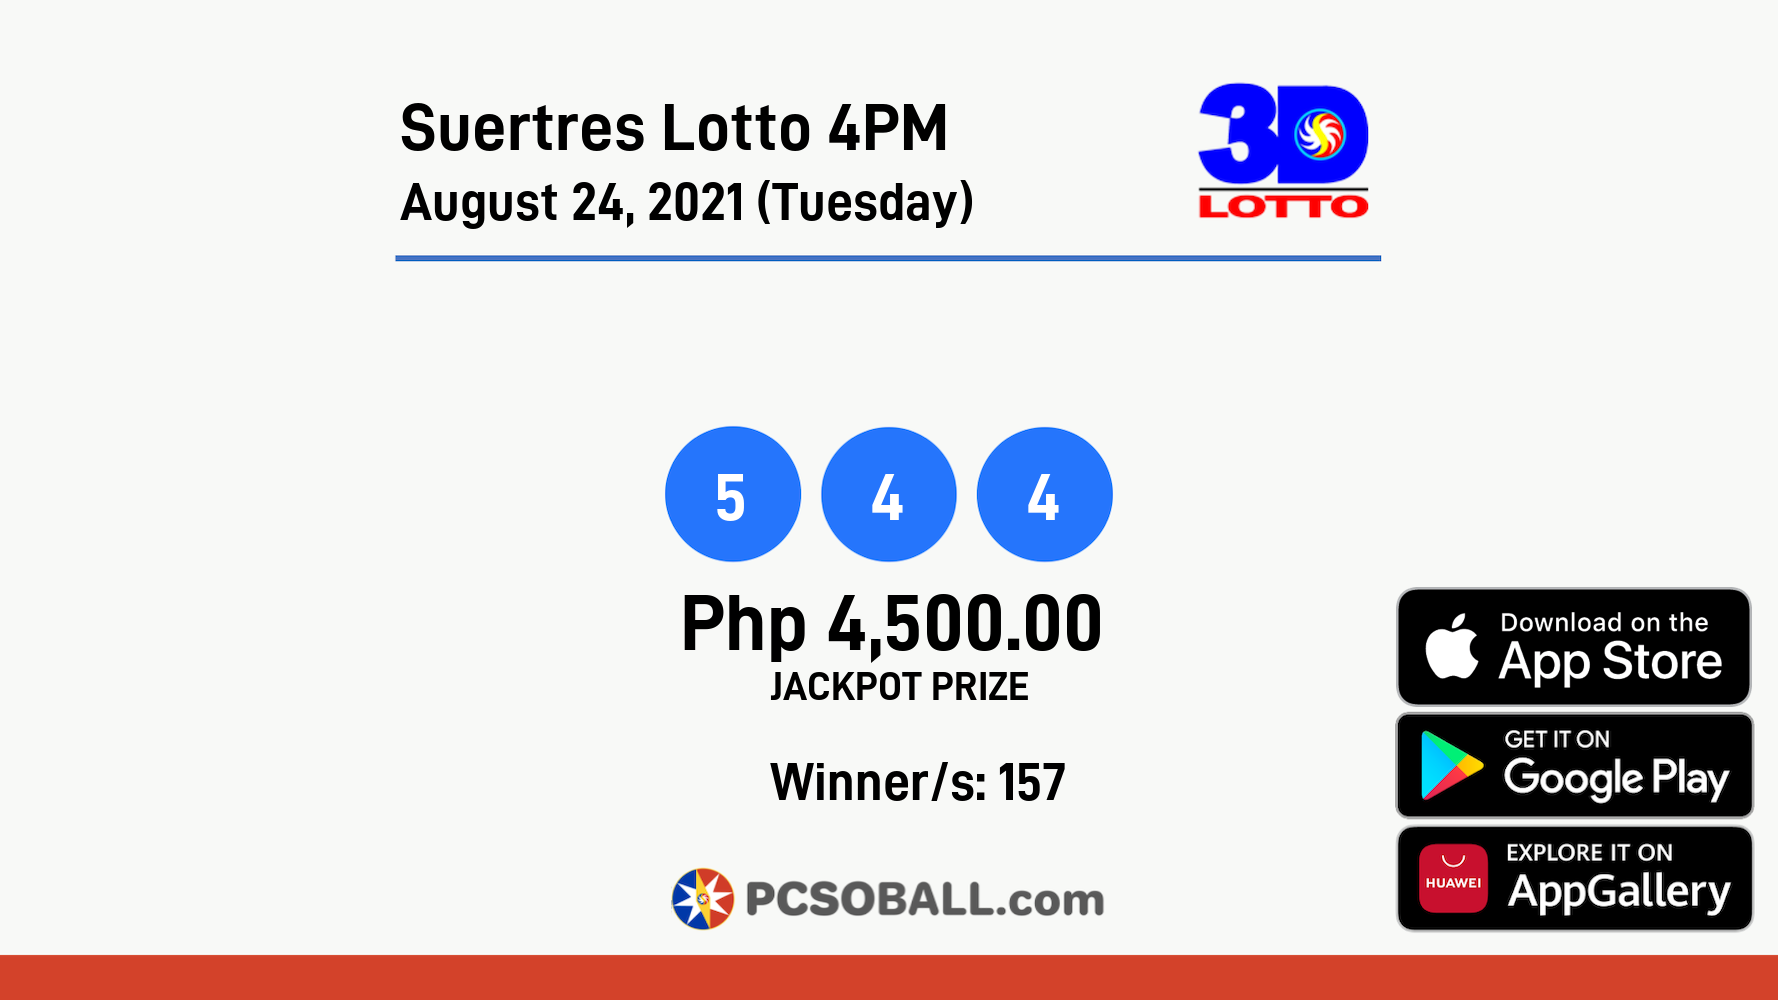 Suertres Lotto 4PM August 24, 2021 (Tuesday) Result